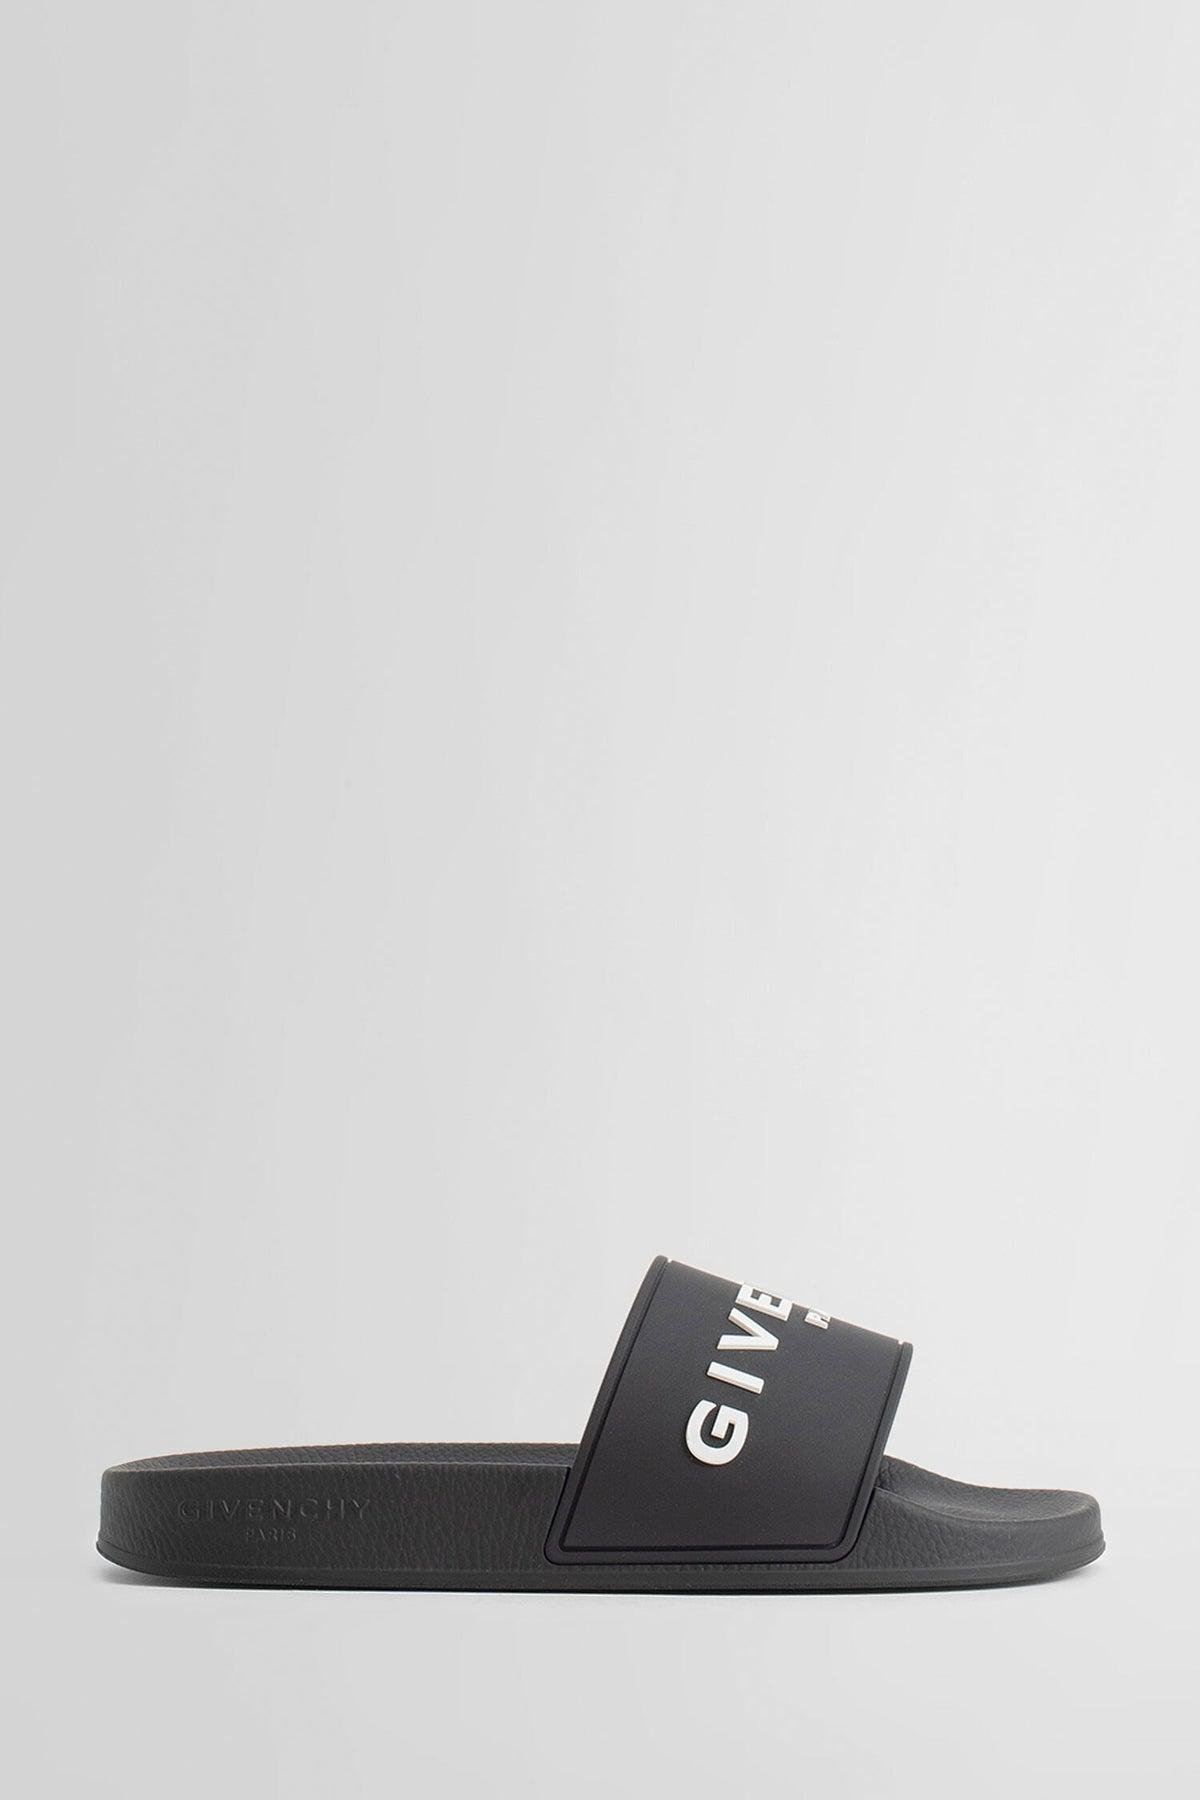 Givenchy Woman Black Slides by GIVENCHY